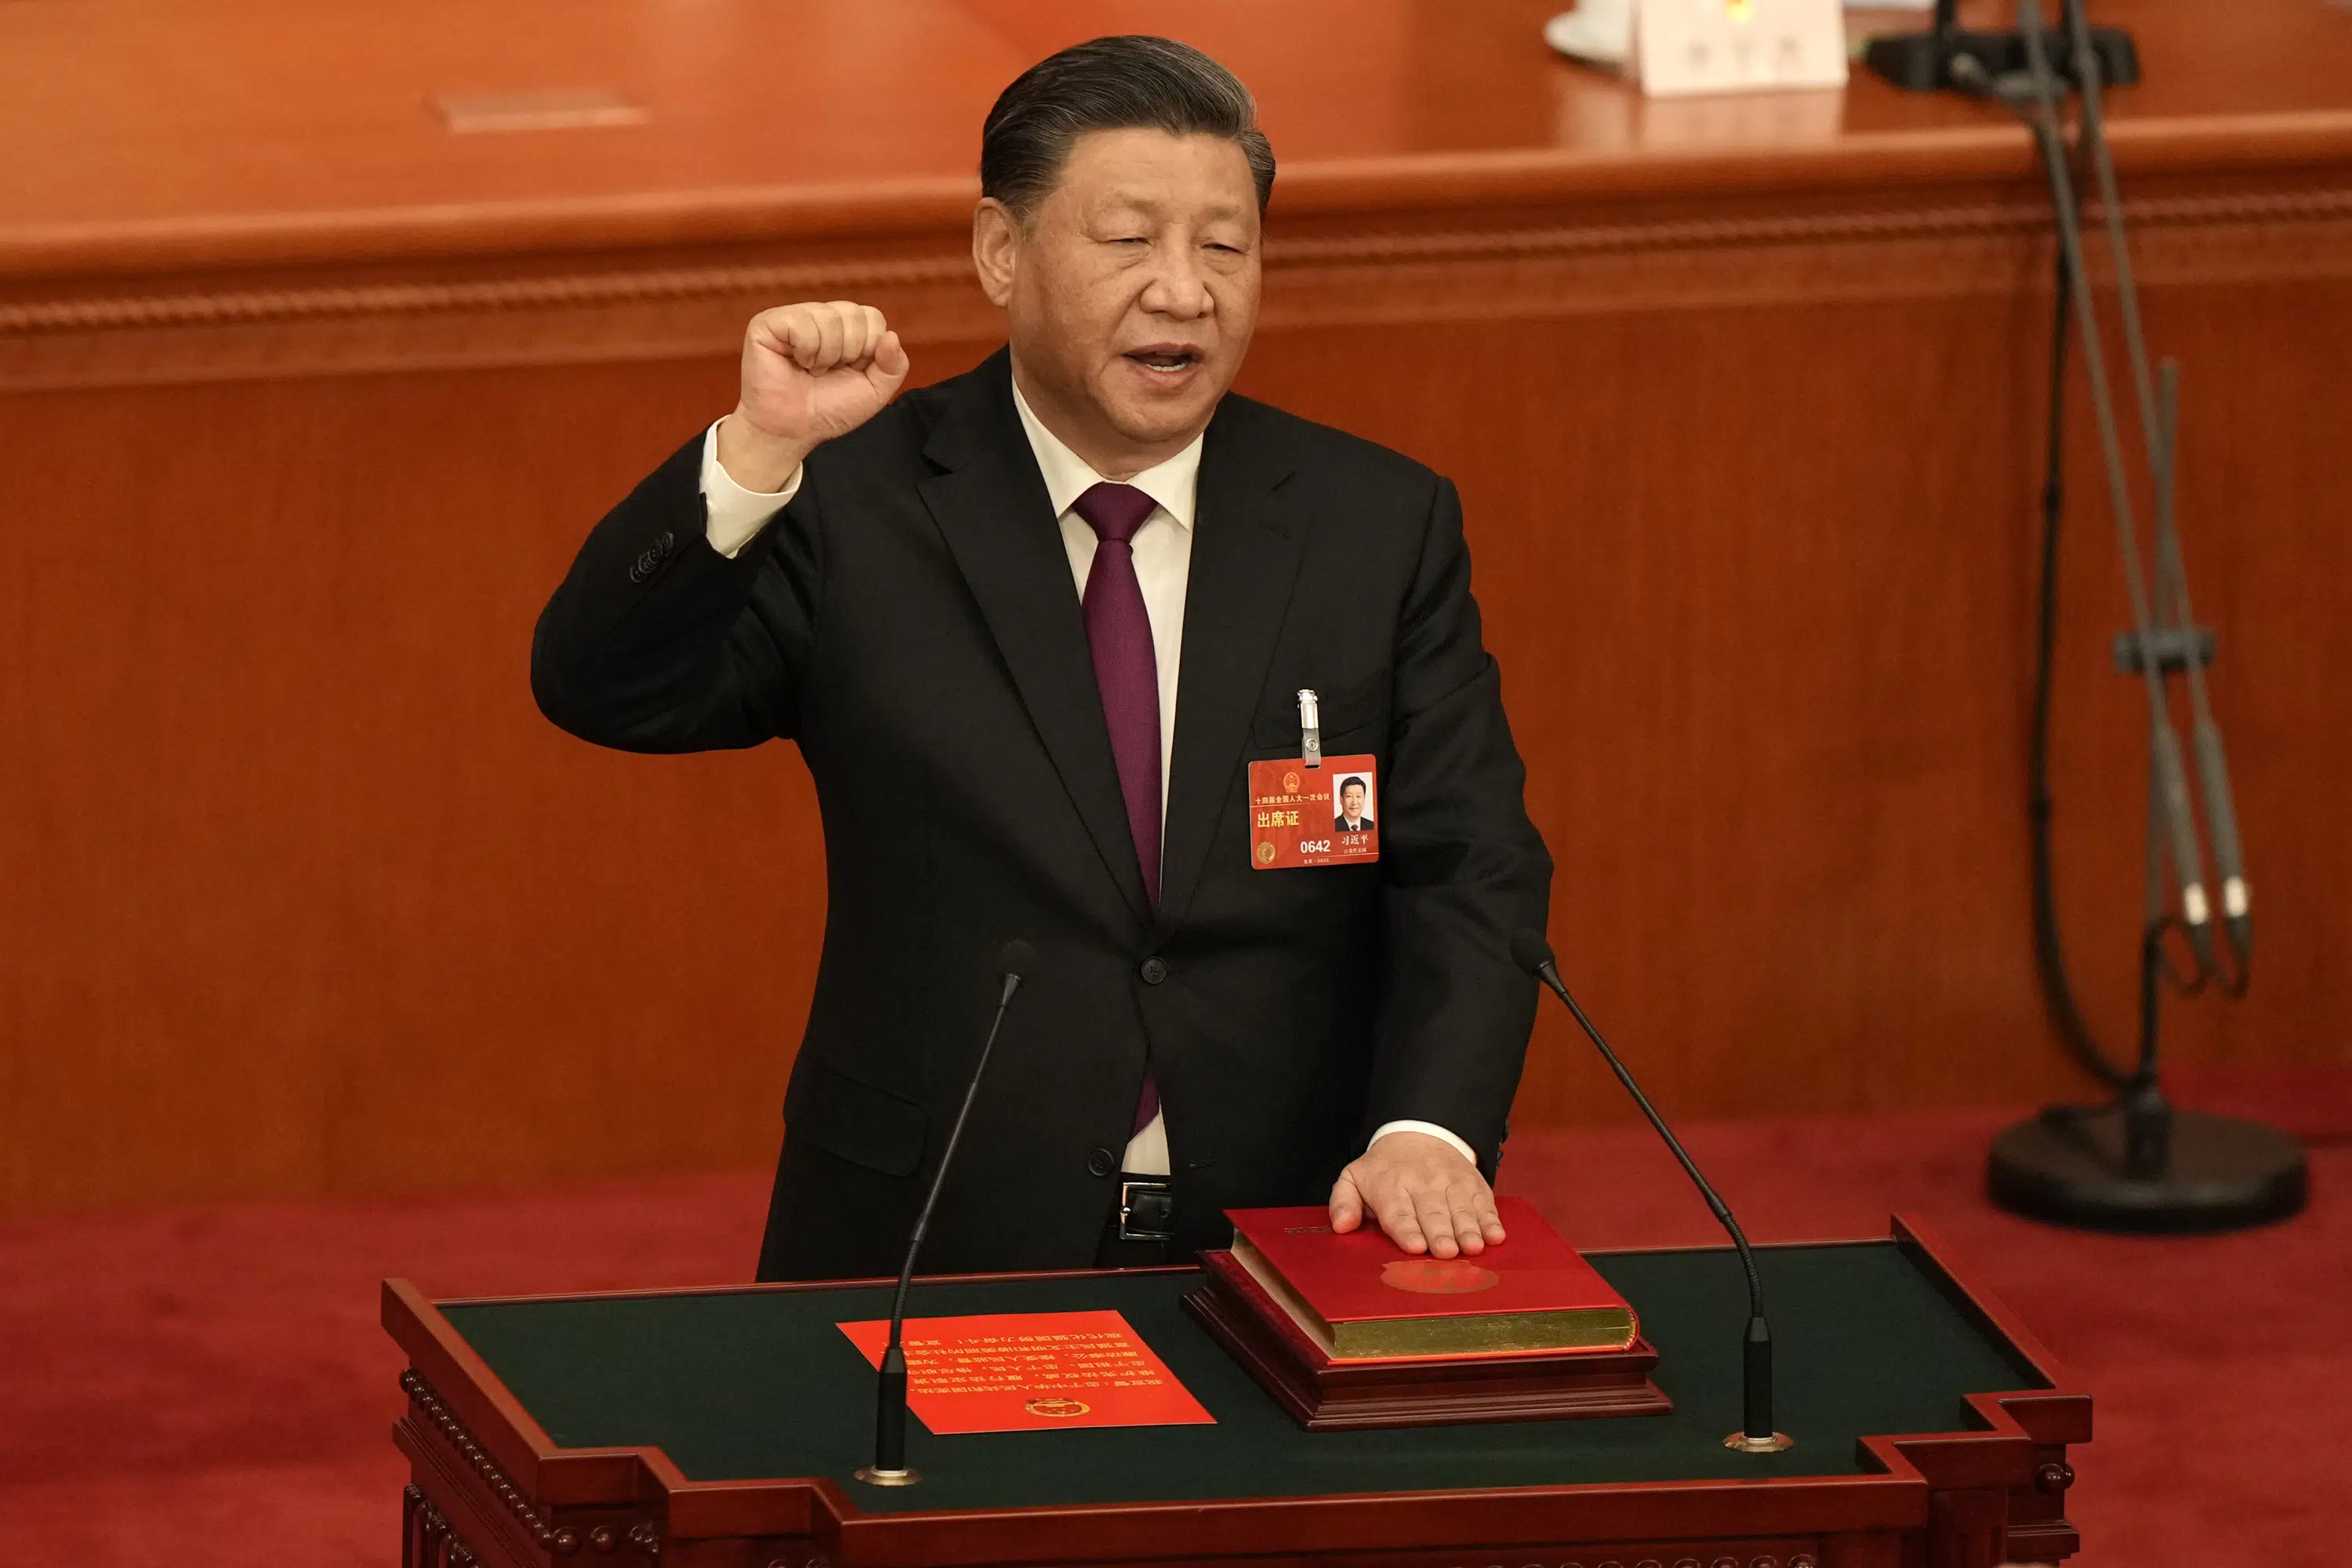 Xi was granted a third term as President of China, and extended the rule